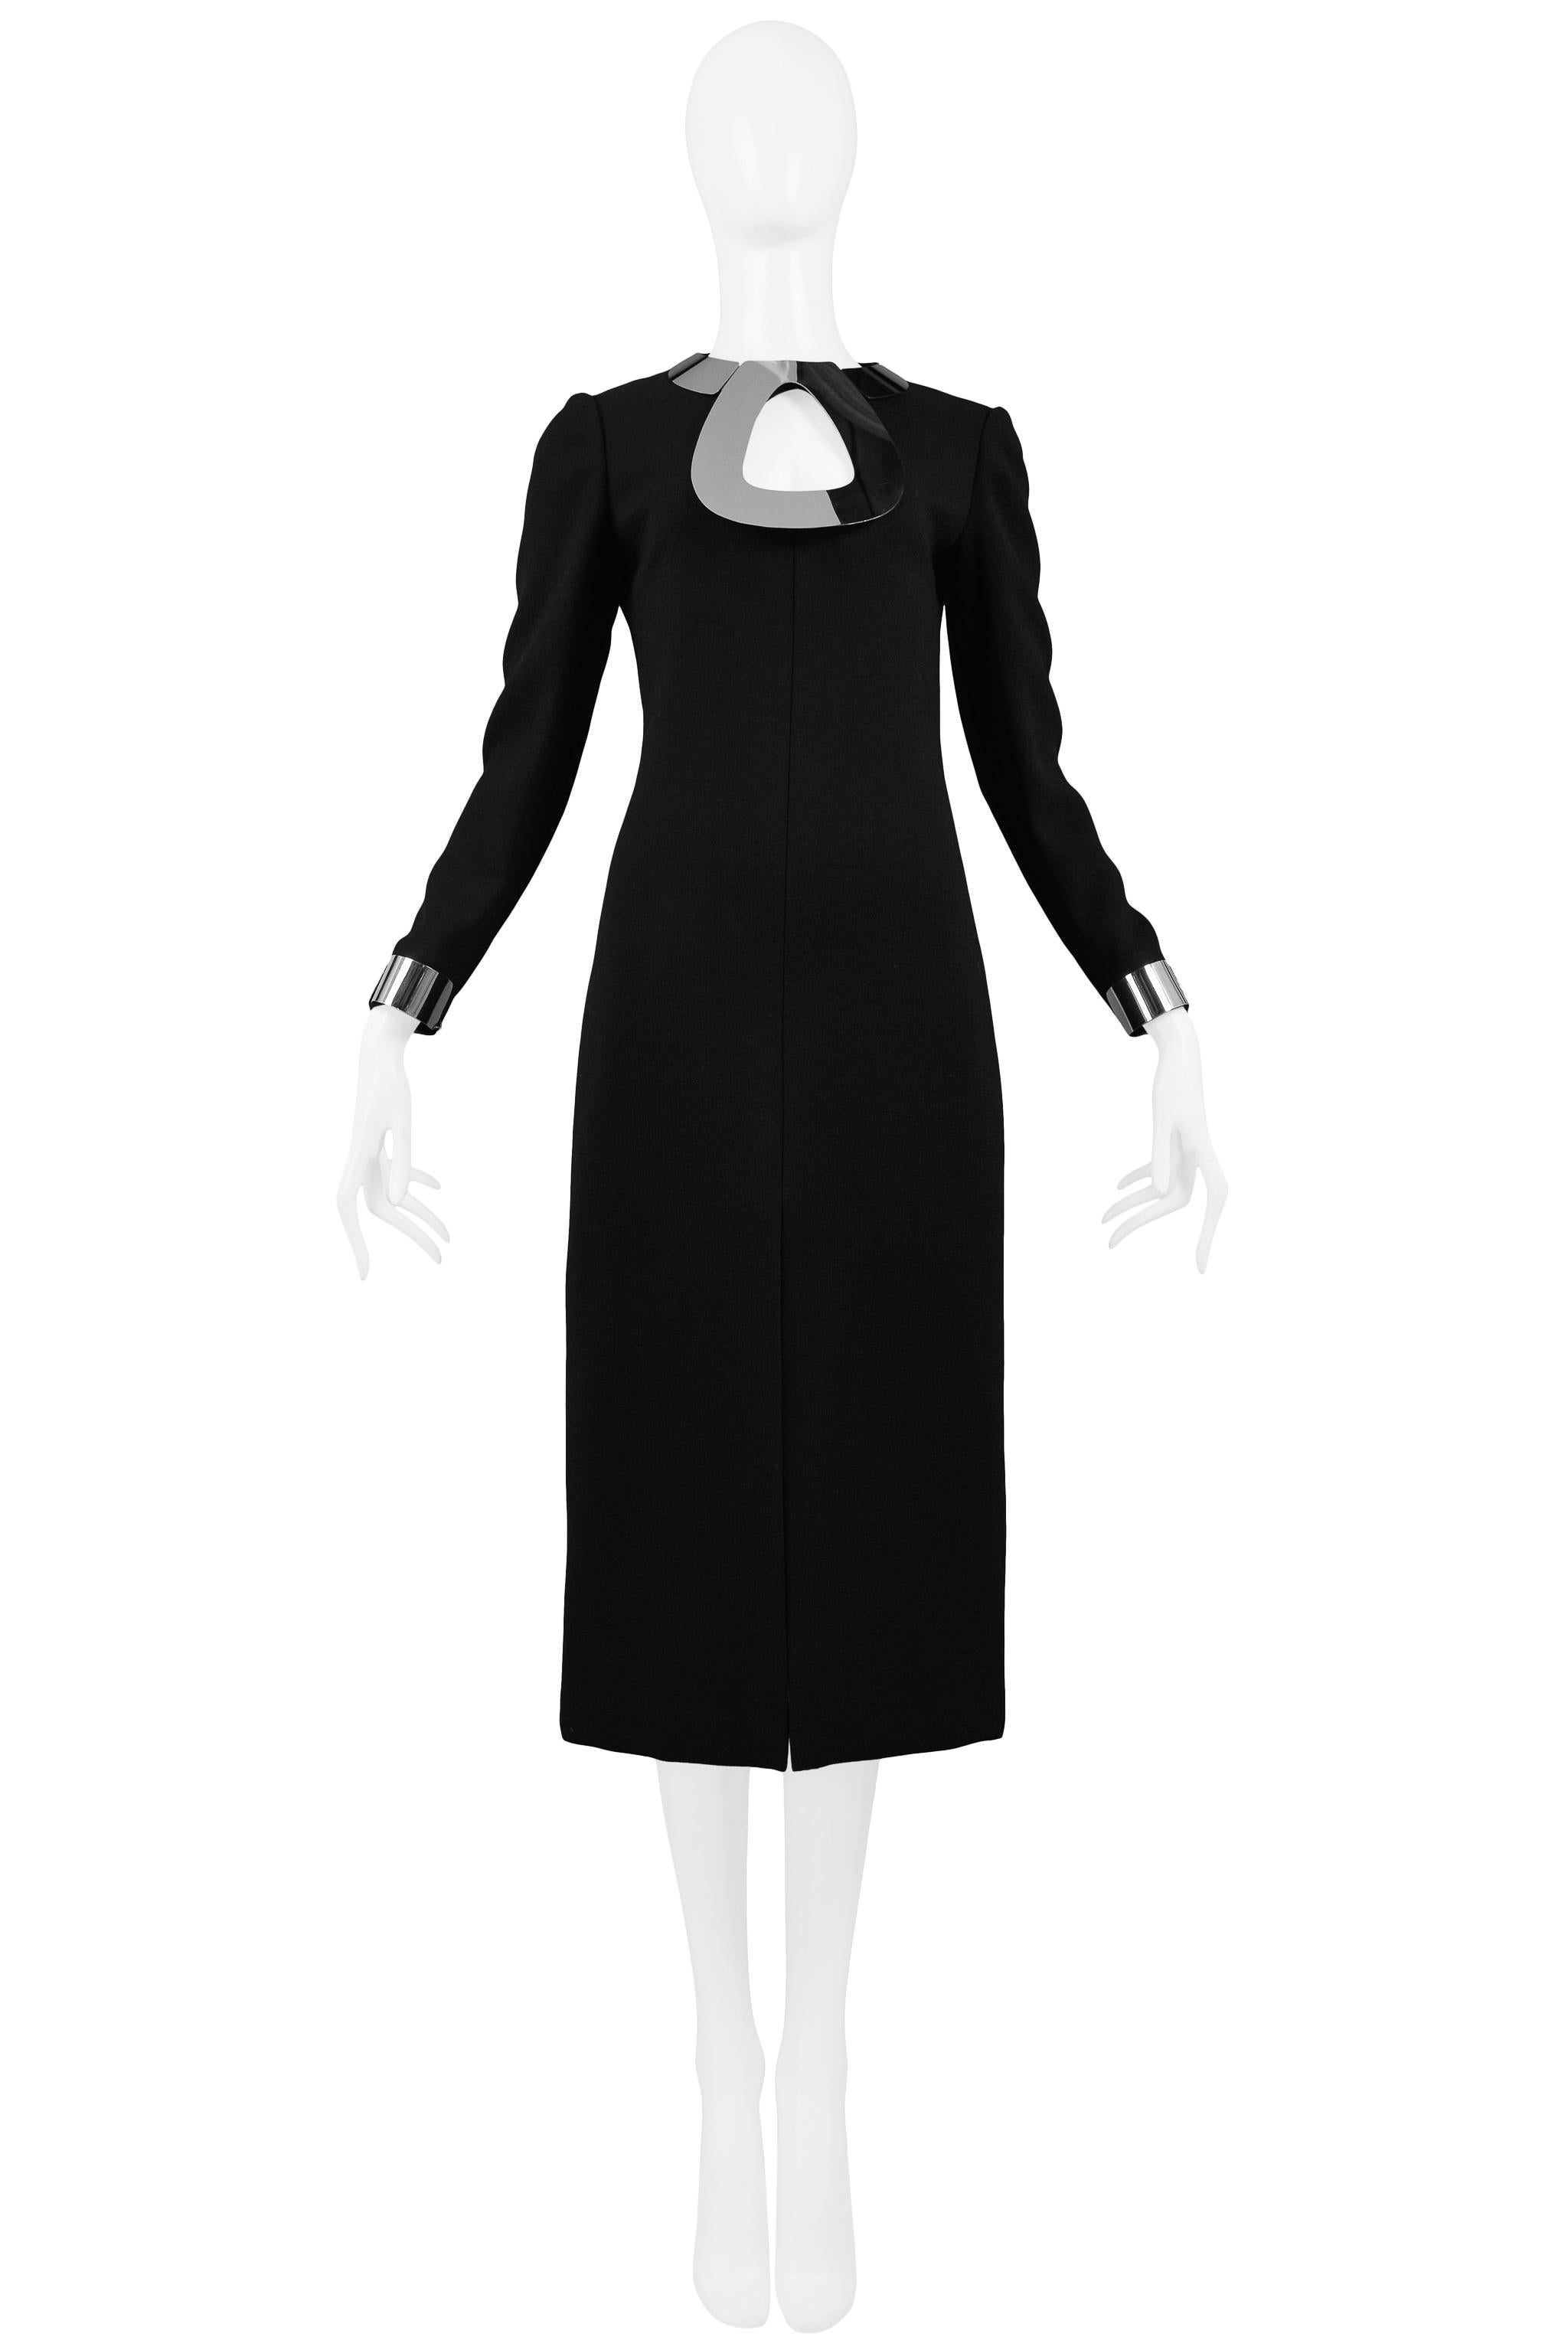 Vintage Pierre Cardin black wool cocktail dress that features an attached chrome metal necklace and bracelet cuffs, slim body, center front slit, center back zipper and below the knee length. Circa 1968.

Excellent Original Vintage Condition.

Size: